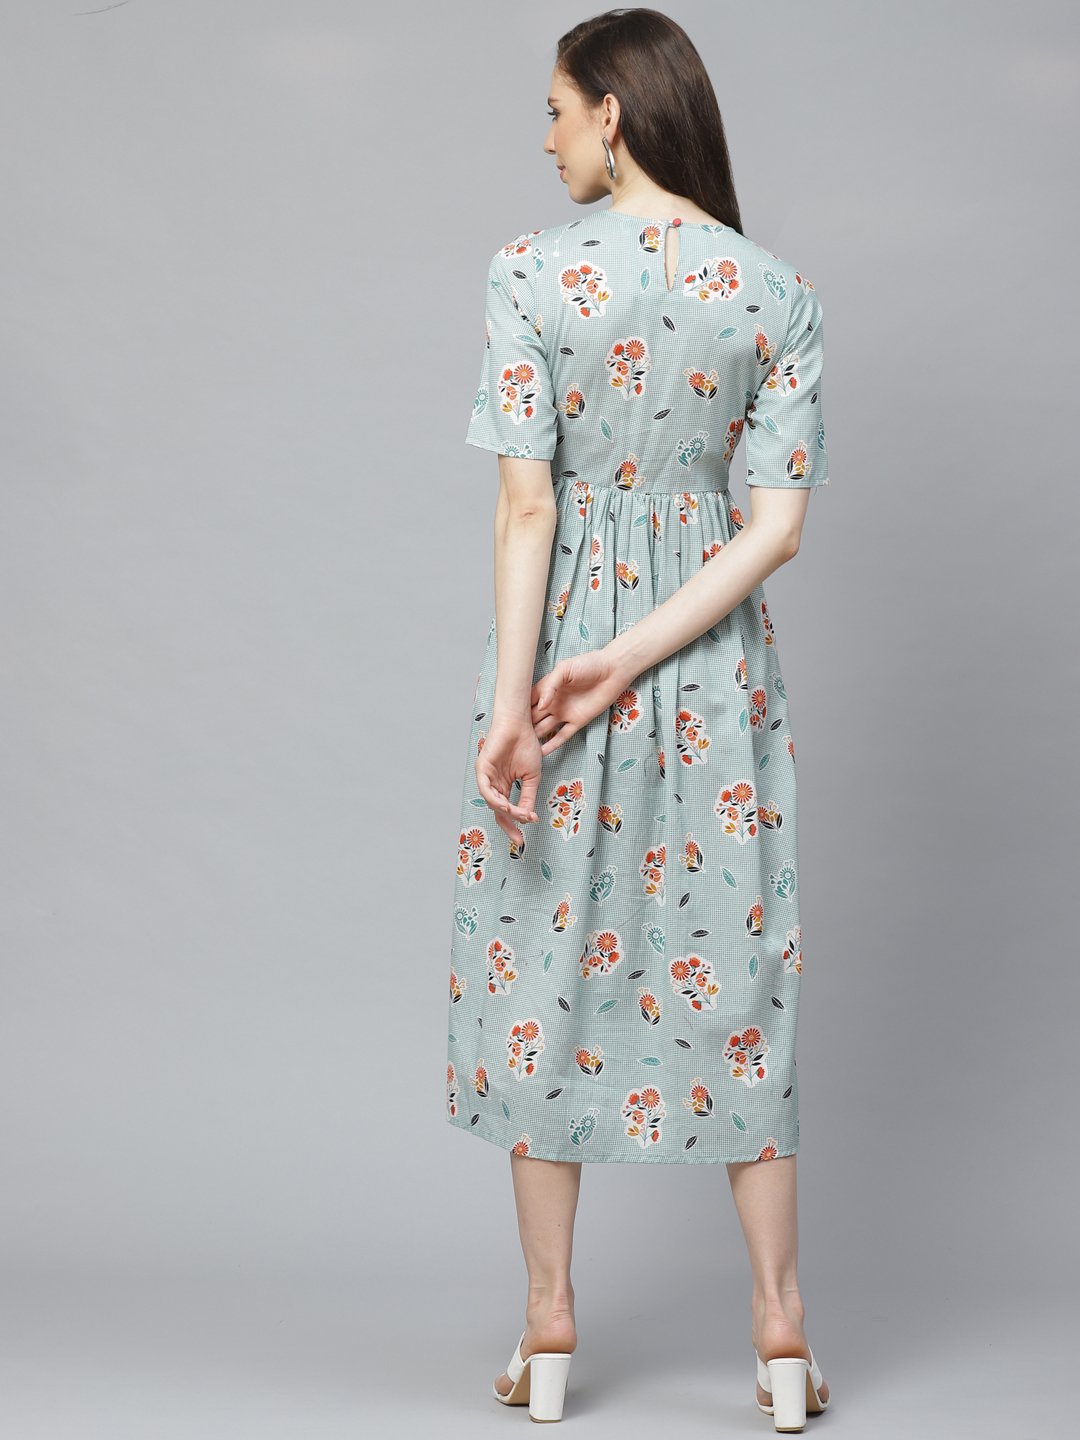 Women's Turquoise Blue Floral Printed Round Neck Cotton A-Line Dress - Nayo Clothing